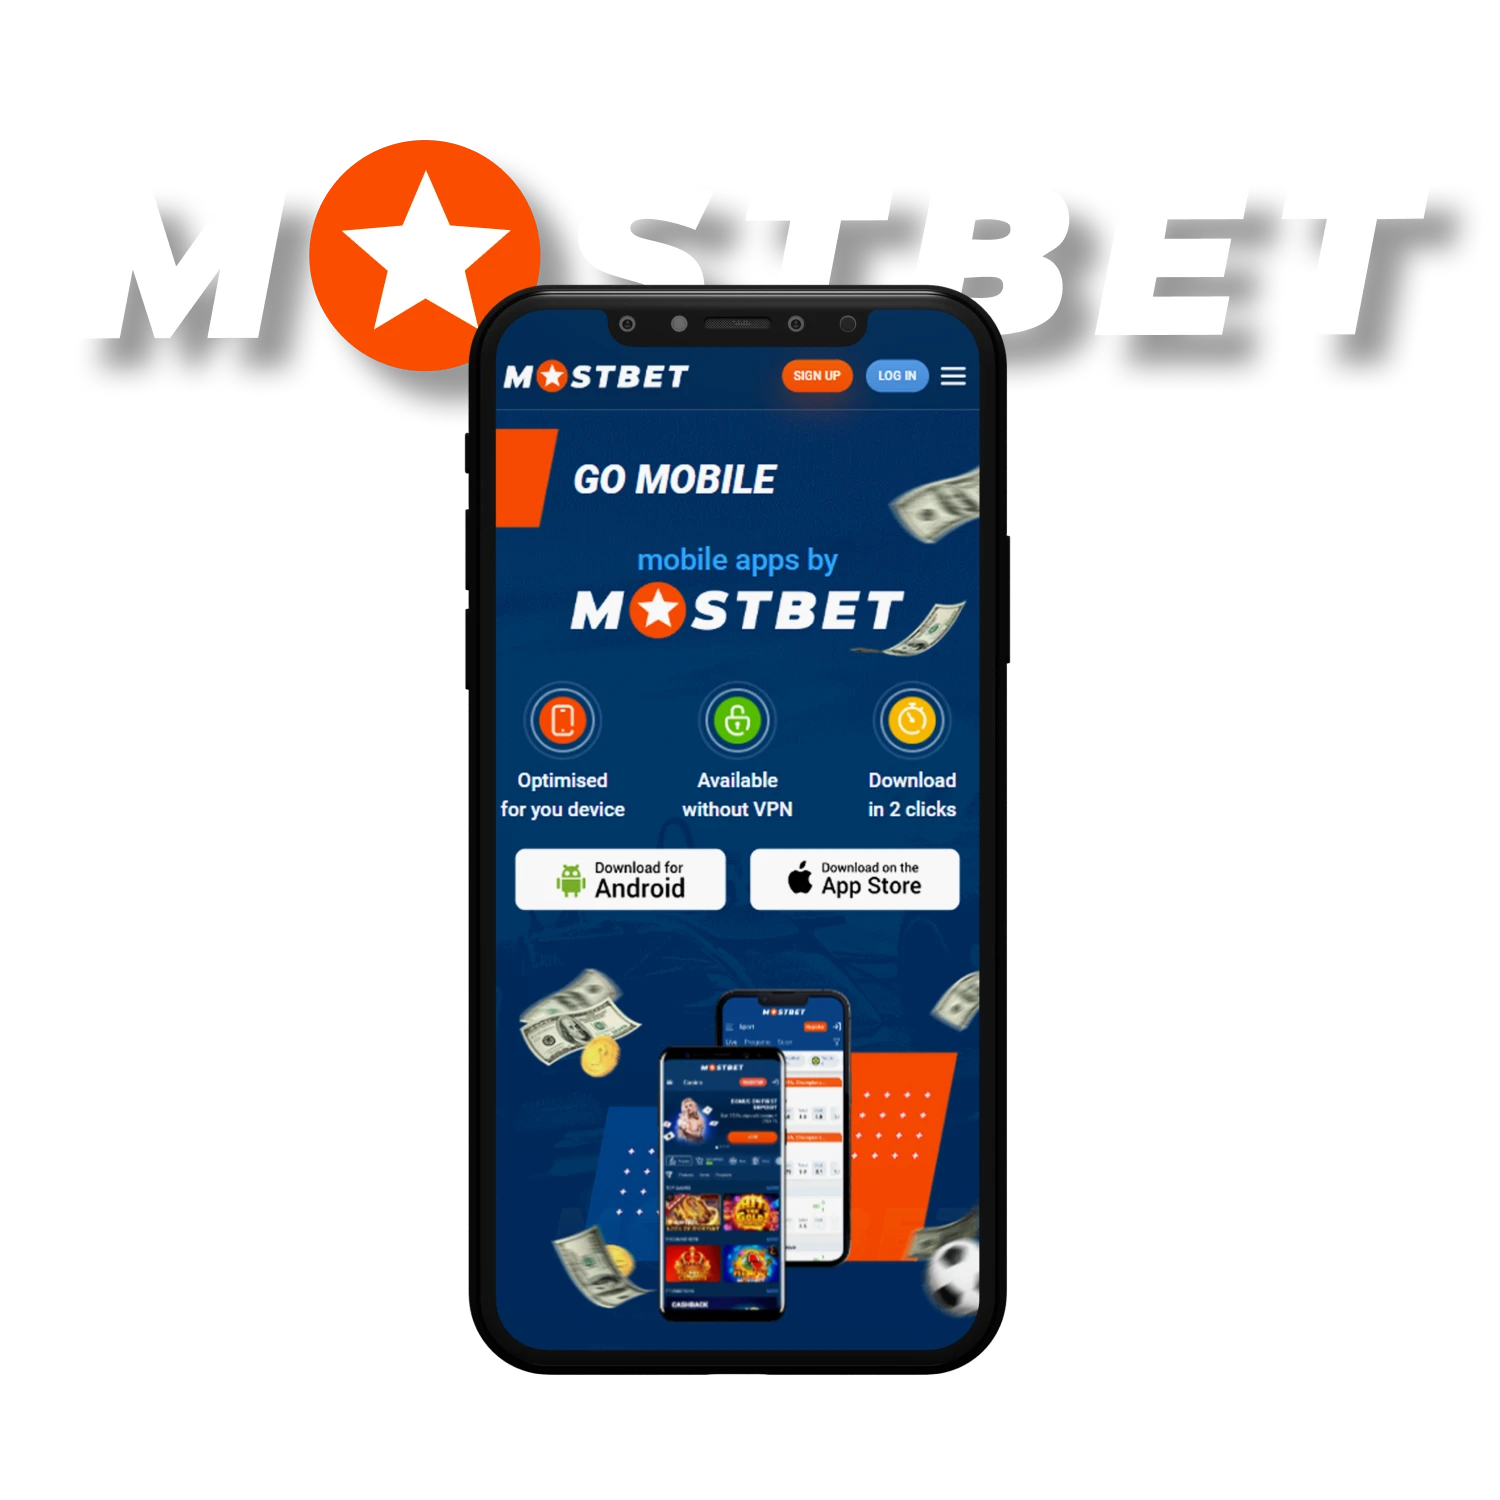 Win Big at Mostbet: Top Betting Company and Casino in Egypt! - Not For Everyone